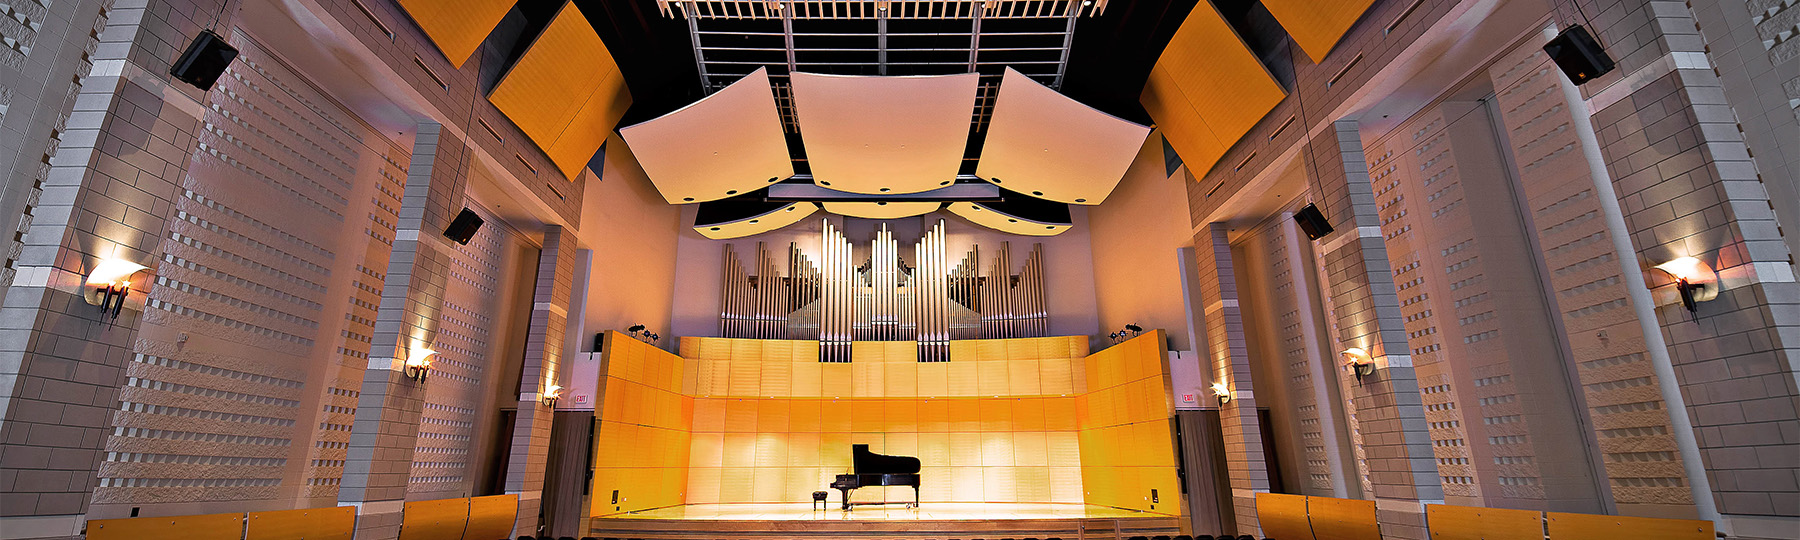 A picture of Staples Family Concert Hall